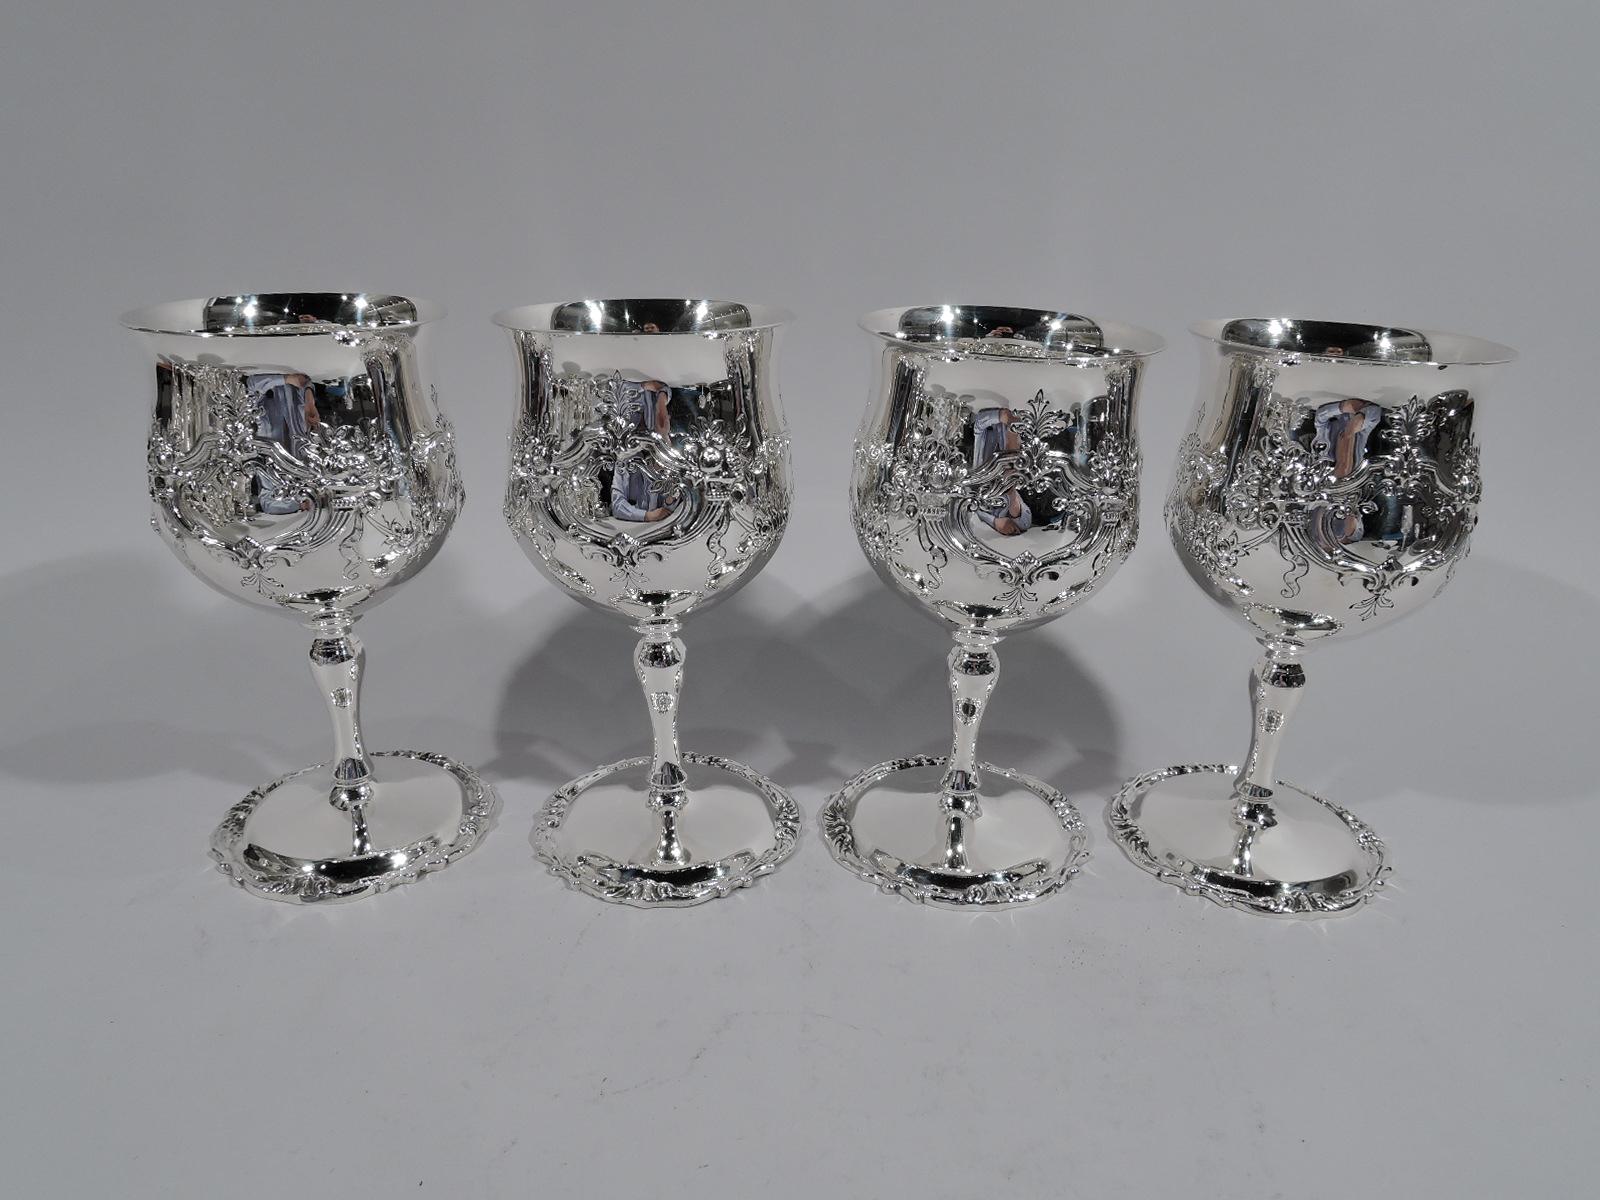 Renaissance Revival Set of 16 Reed & Barton Sterling Silver Goblets in Francis I Pattern